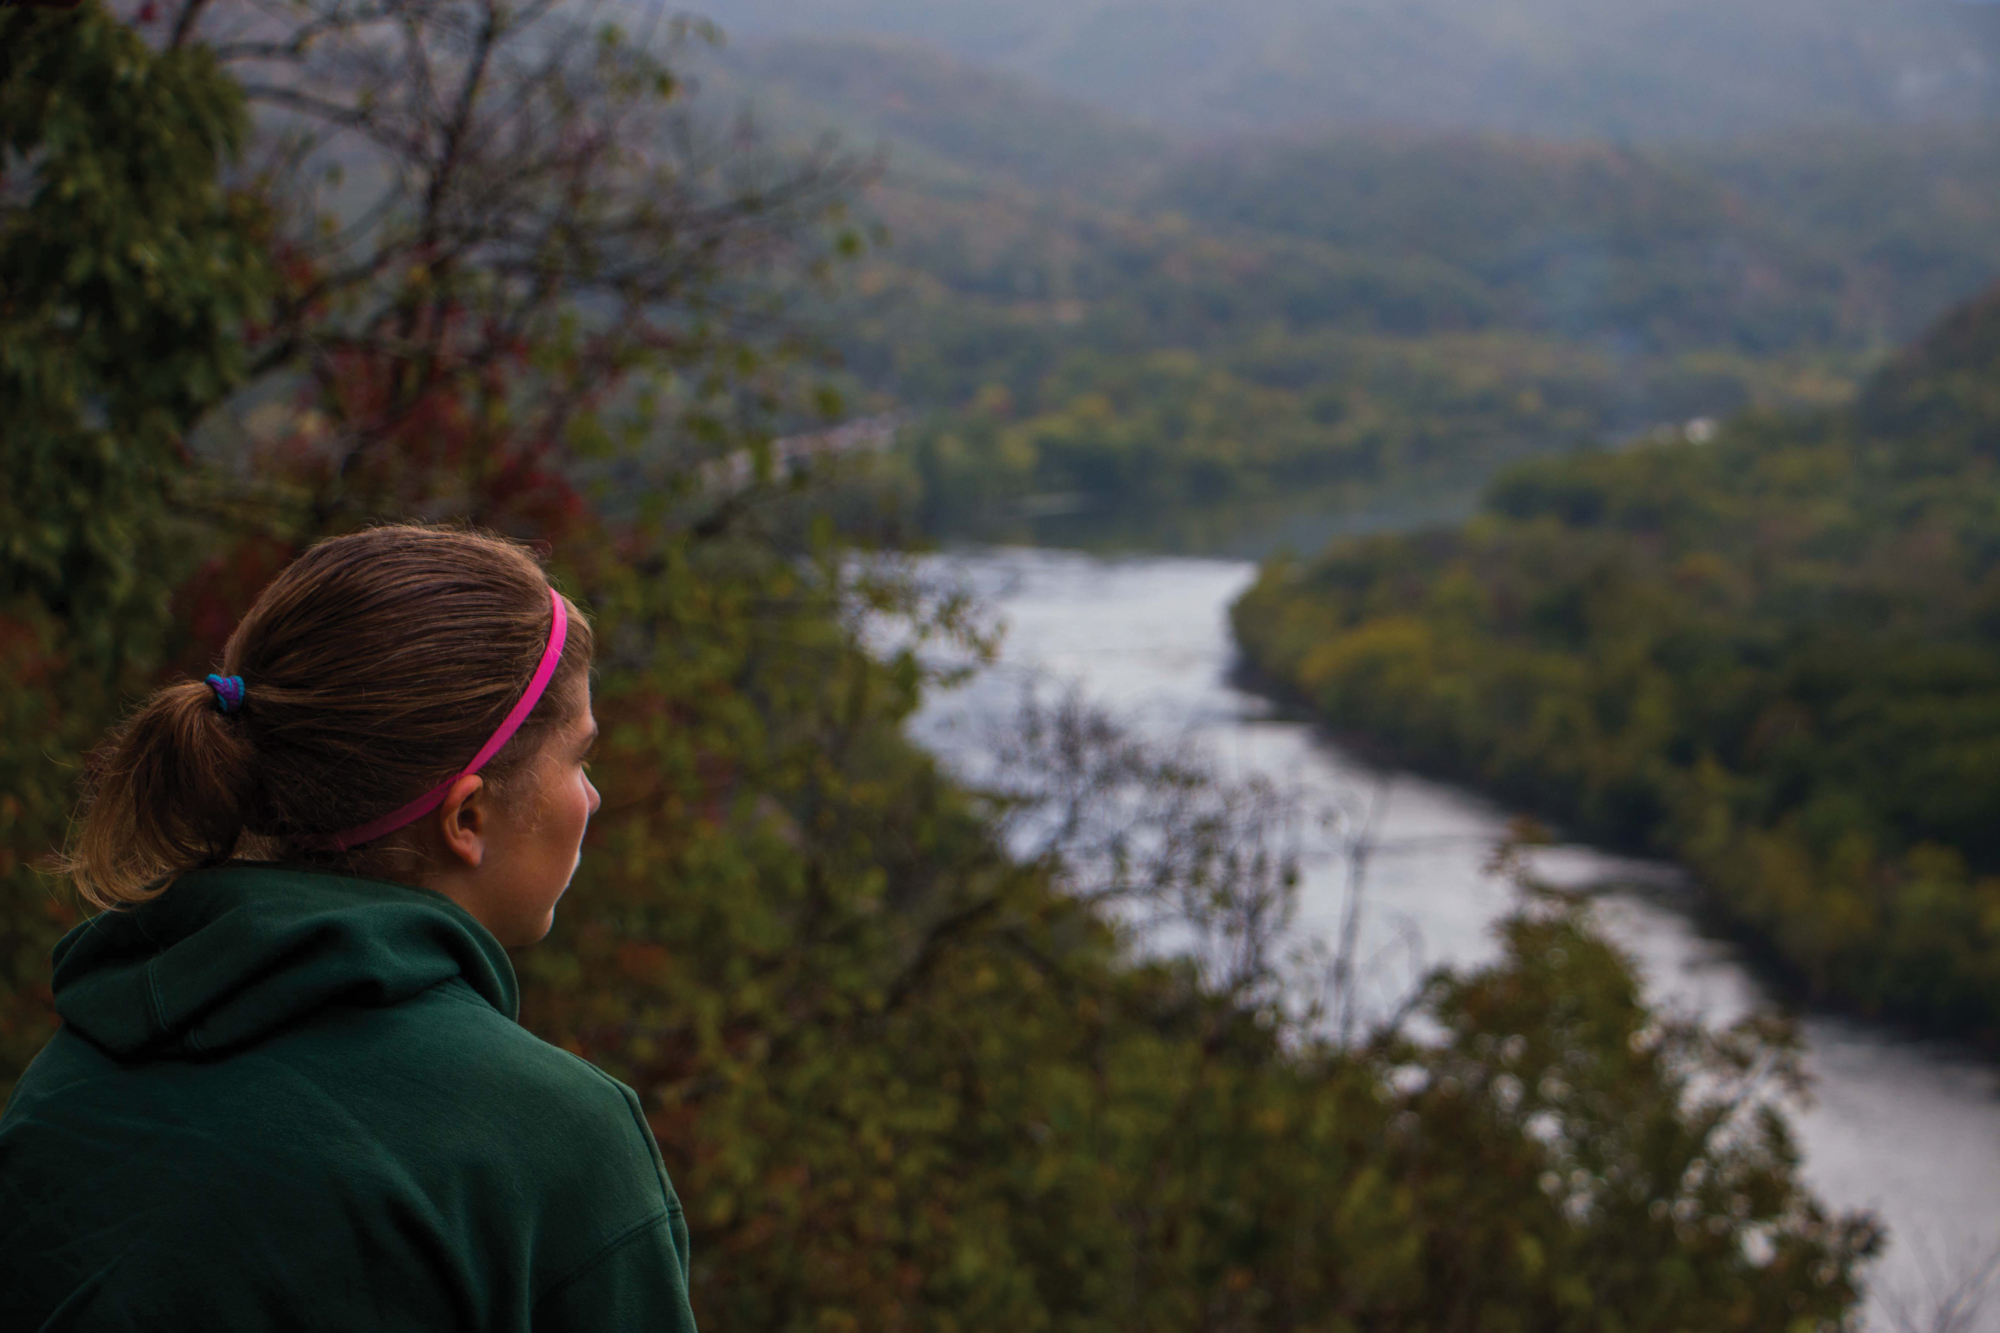 A female student looks out over a vista of forested mountains in West Virginia.